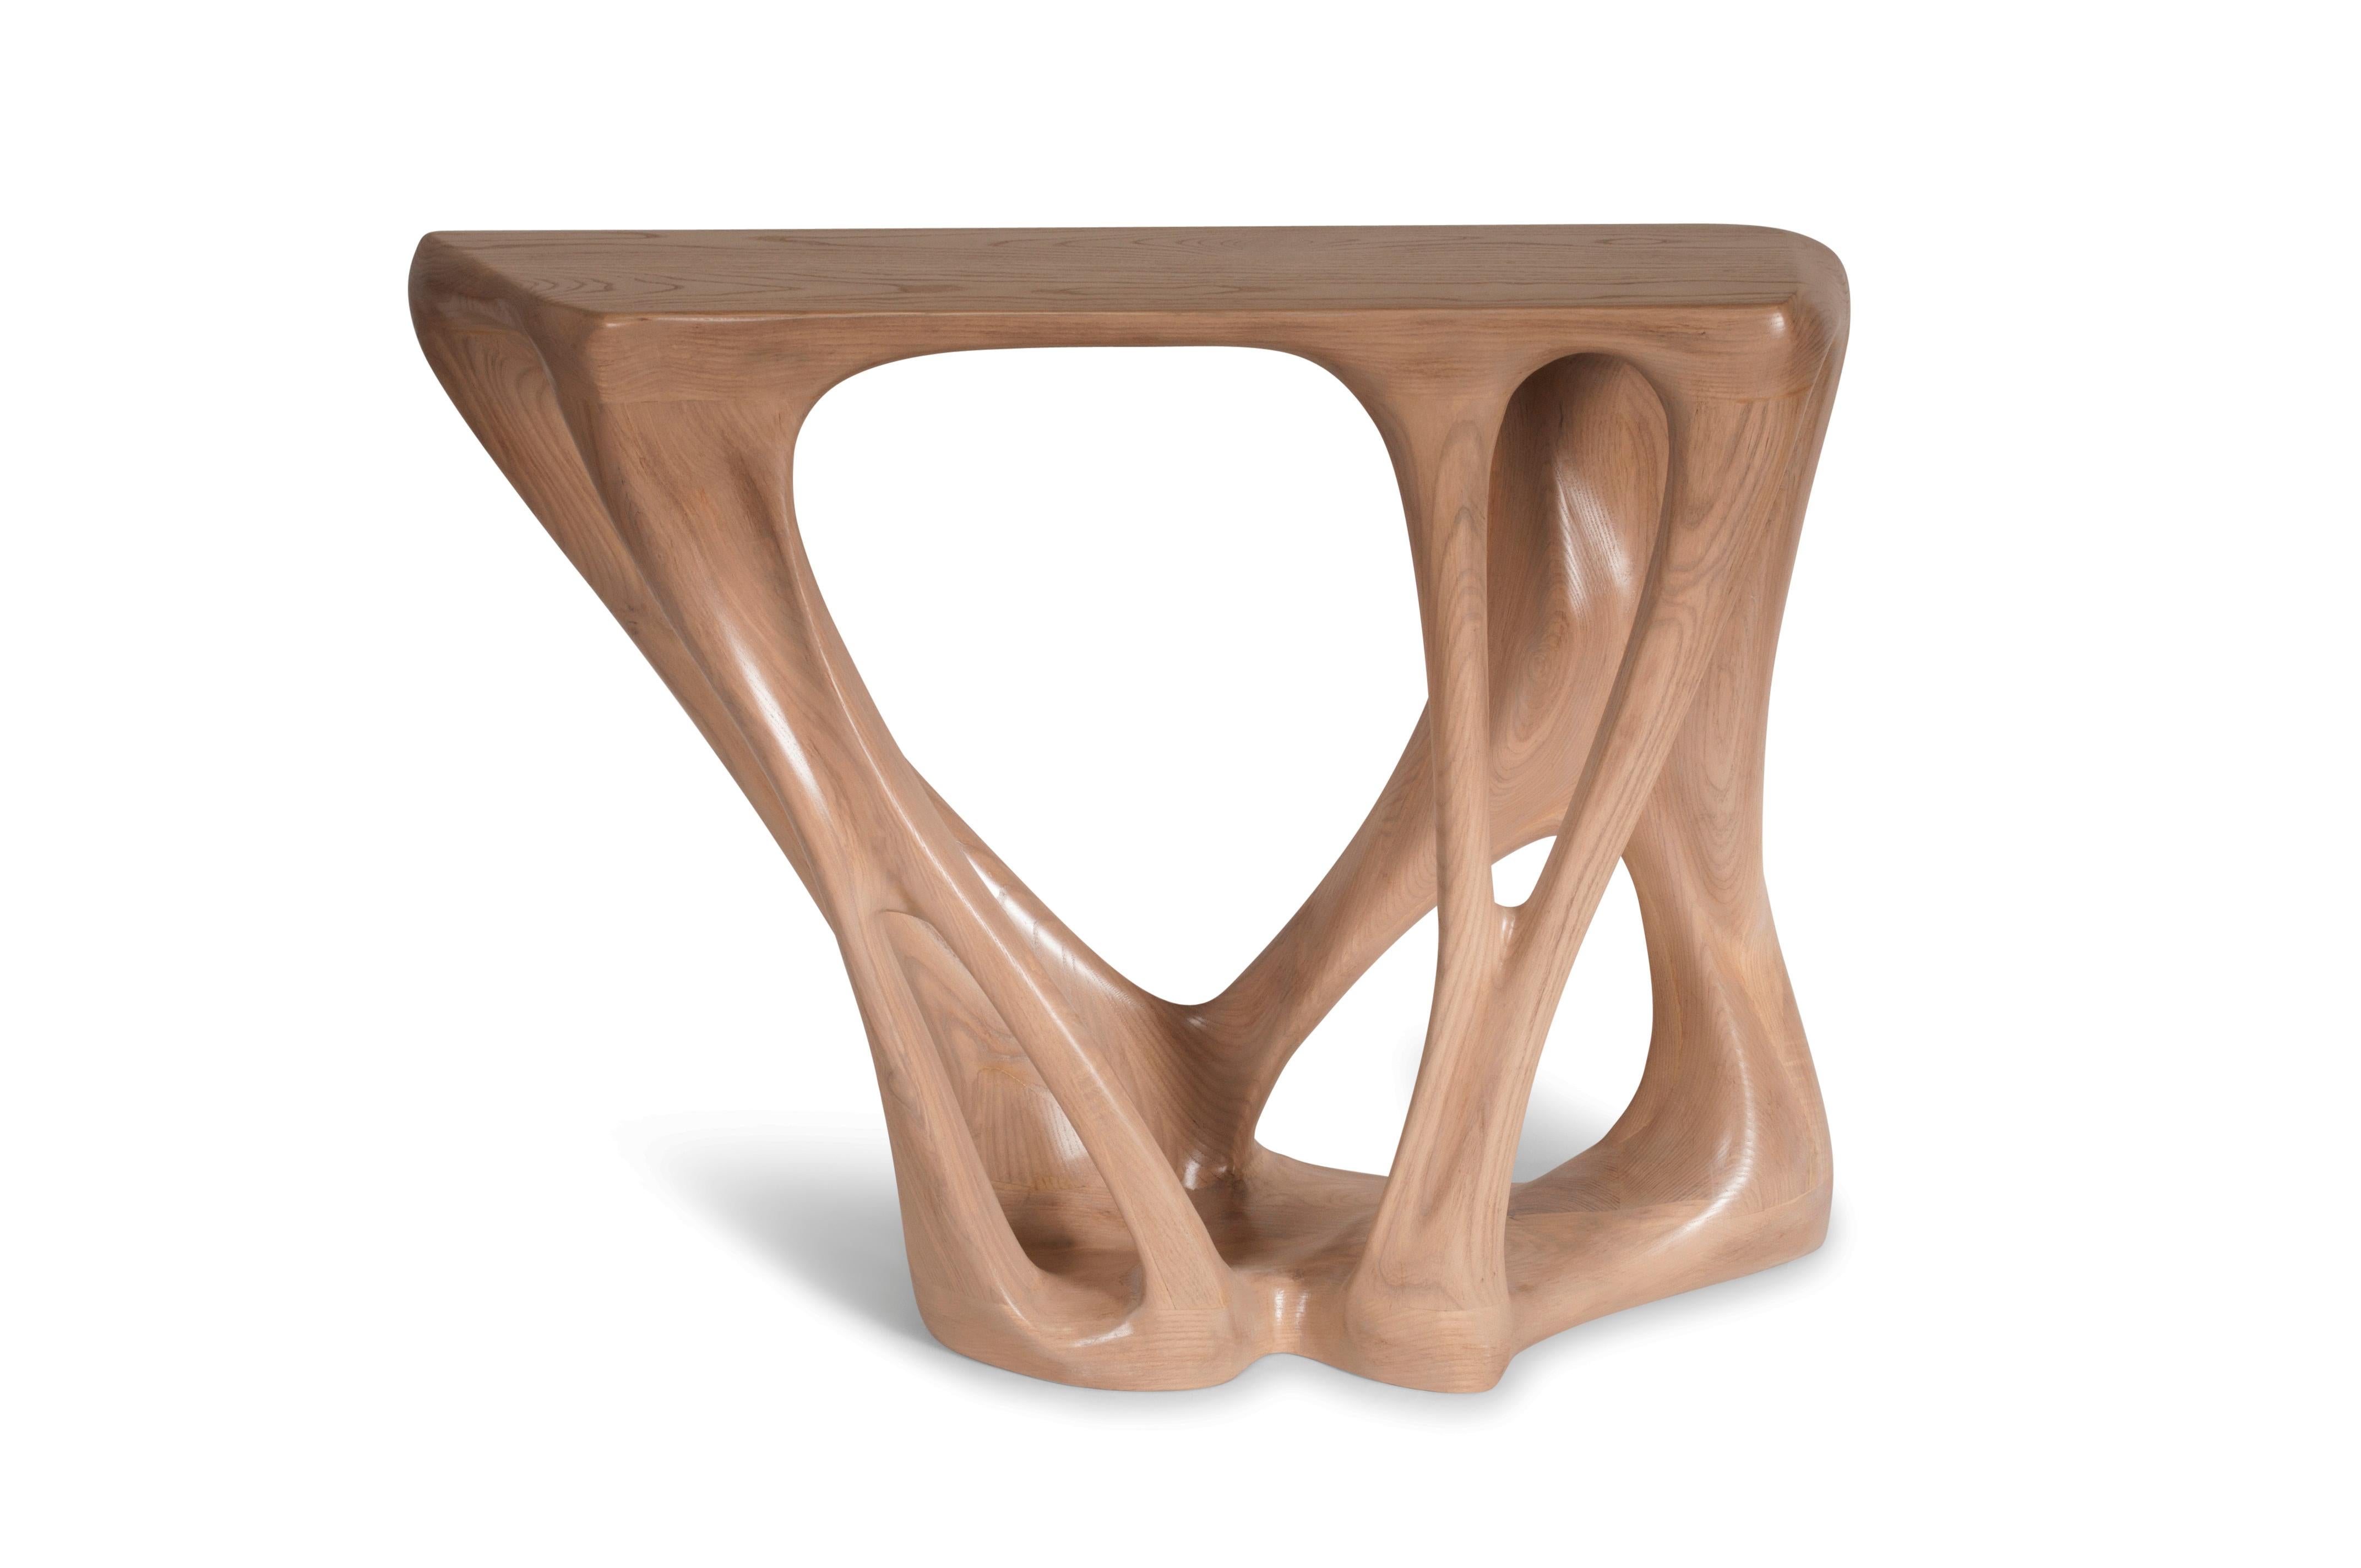 Petra console table is a stylish futuristic sculptural art table with a dynamic form designed and manufactured by Amorph. Petra is made out of solid ash wood stained with satin finish. By the nature, the ash wood grain’s look would be slightly